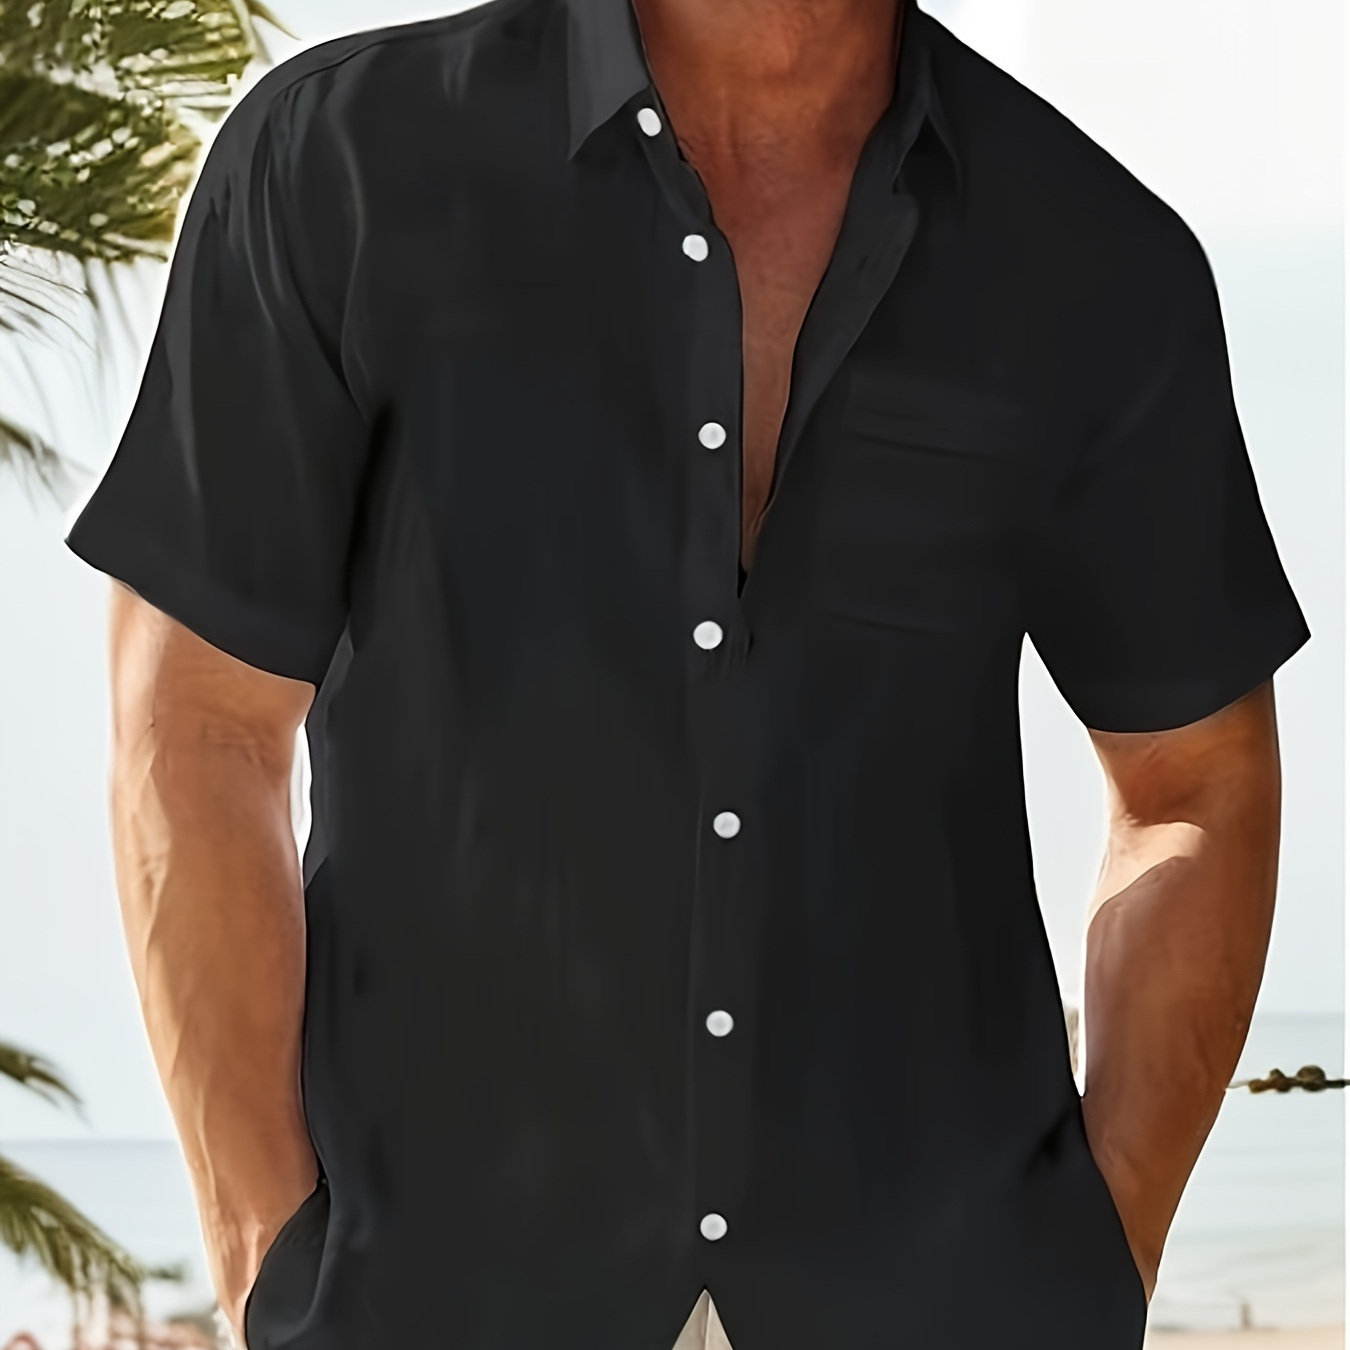 

Men's Summer Fashionable And Simple Short Sleeve Button Casual Lapel Simple Shirt, Trendy And Versatile, Suitable For Dates, Beach Holiday, As Gifts